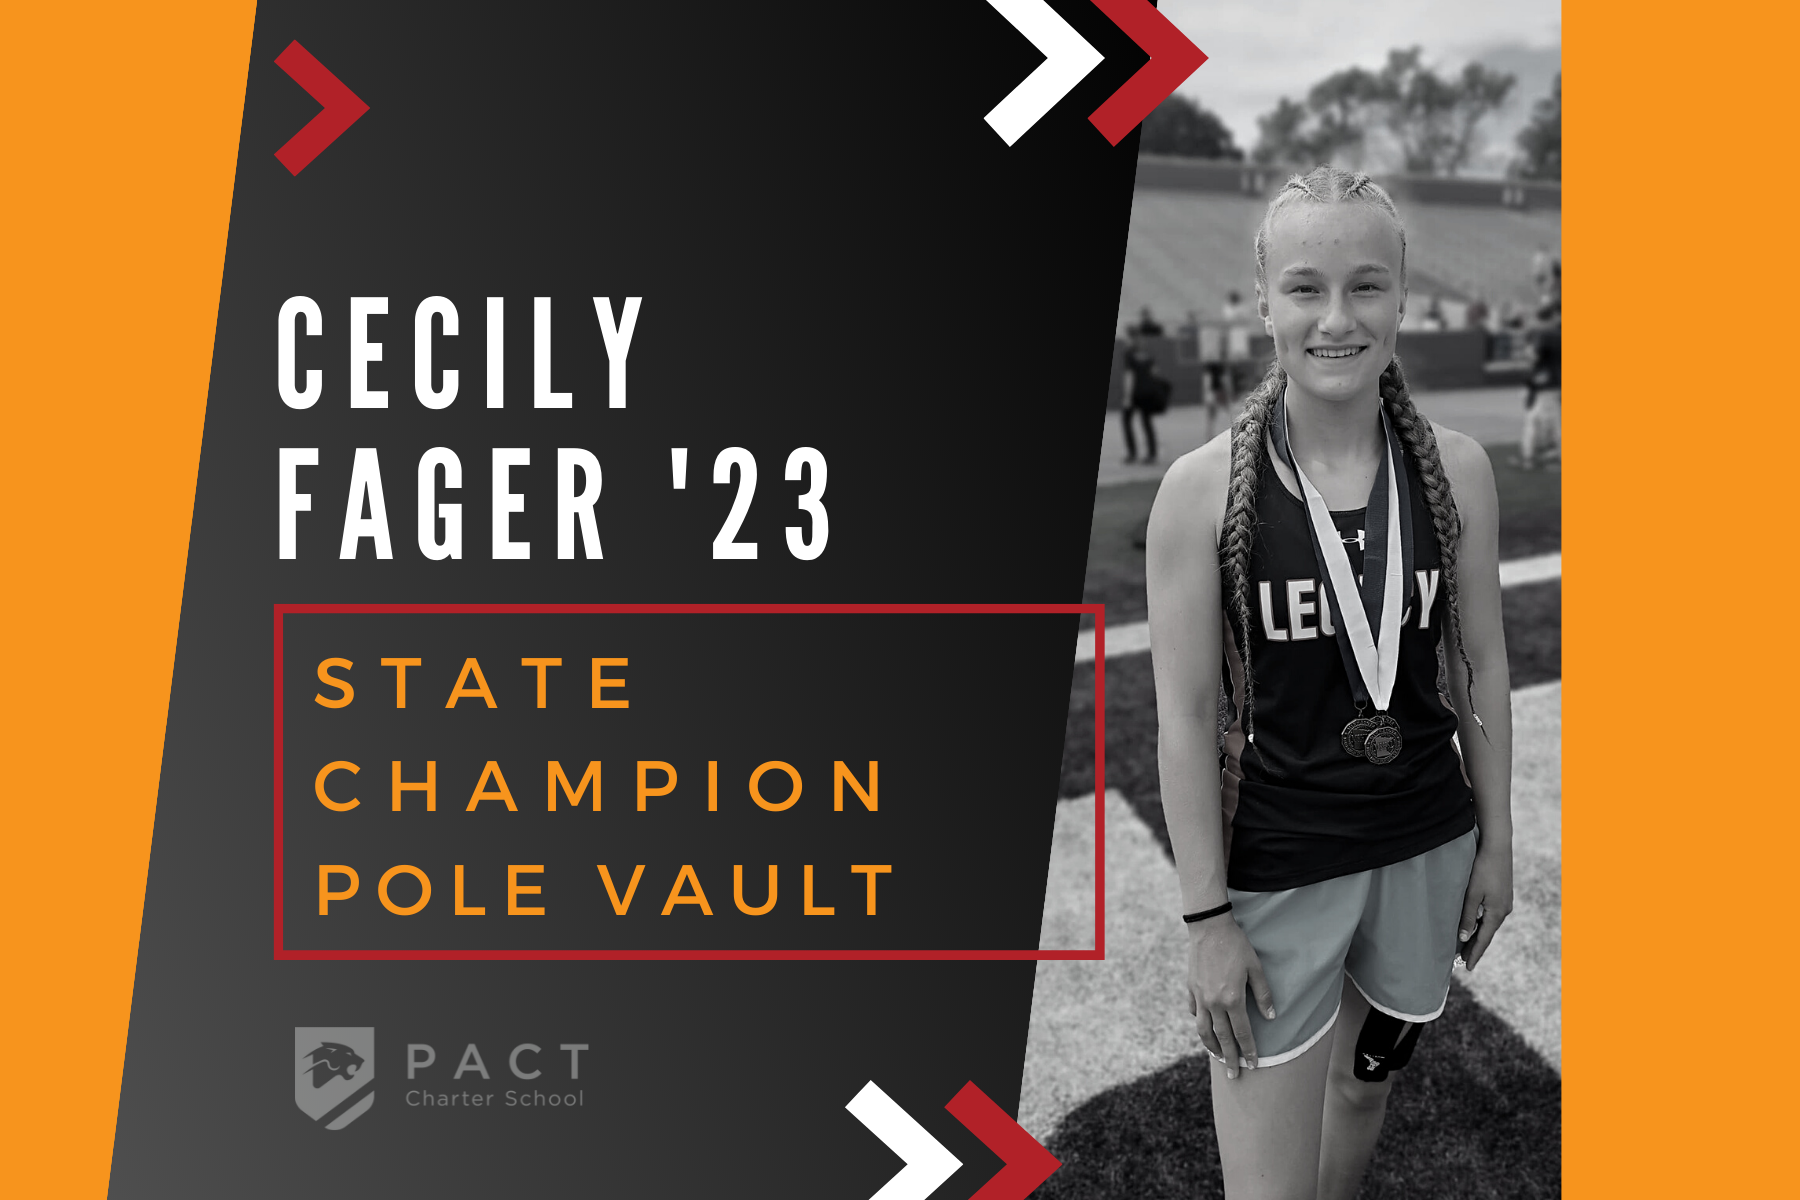 Fager ’23 is State Pole Vault Champion